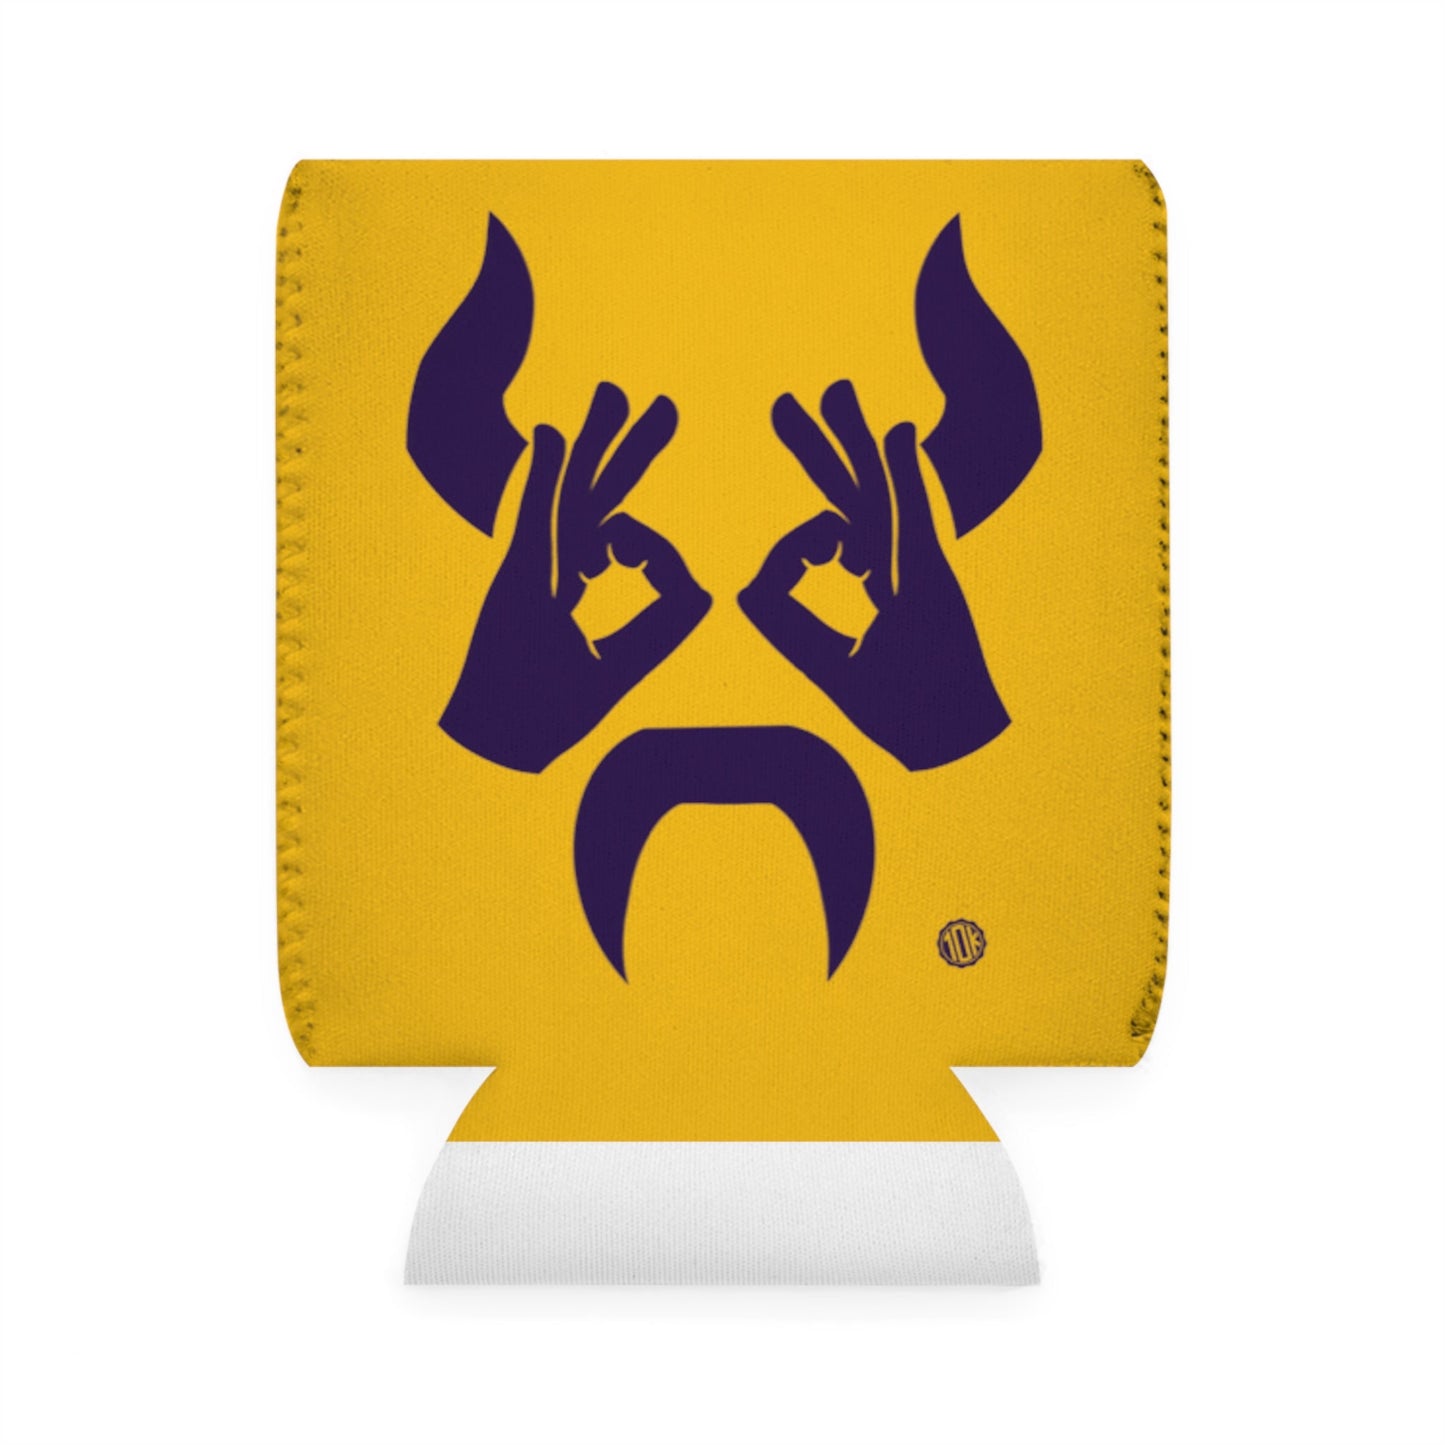 10K Takes Griddy Viking Coozie - DSP On Demand